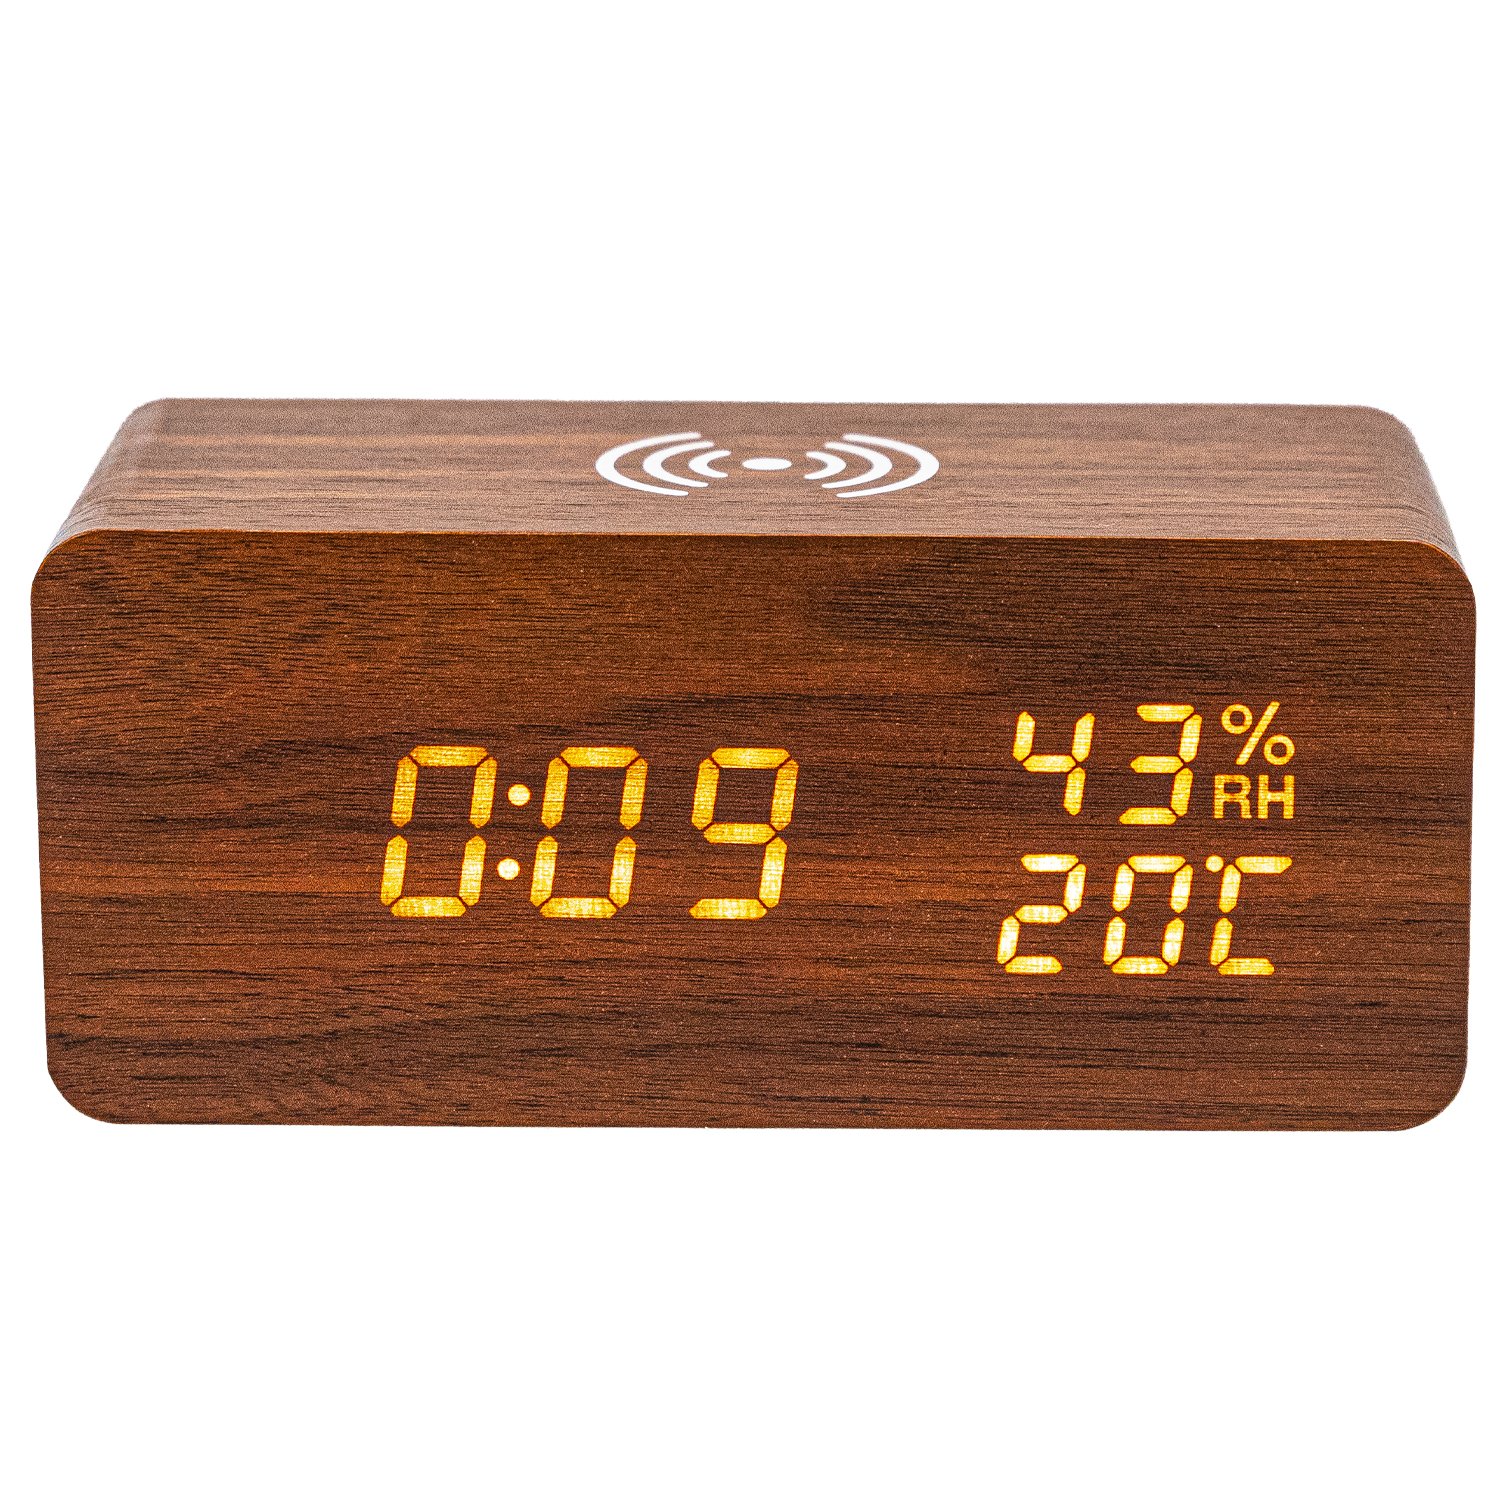 LED Holz Wecker mit Features